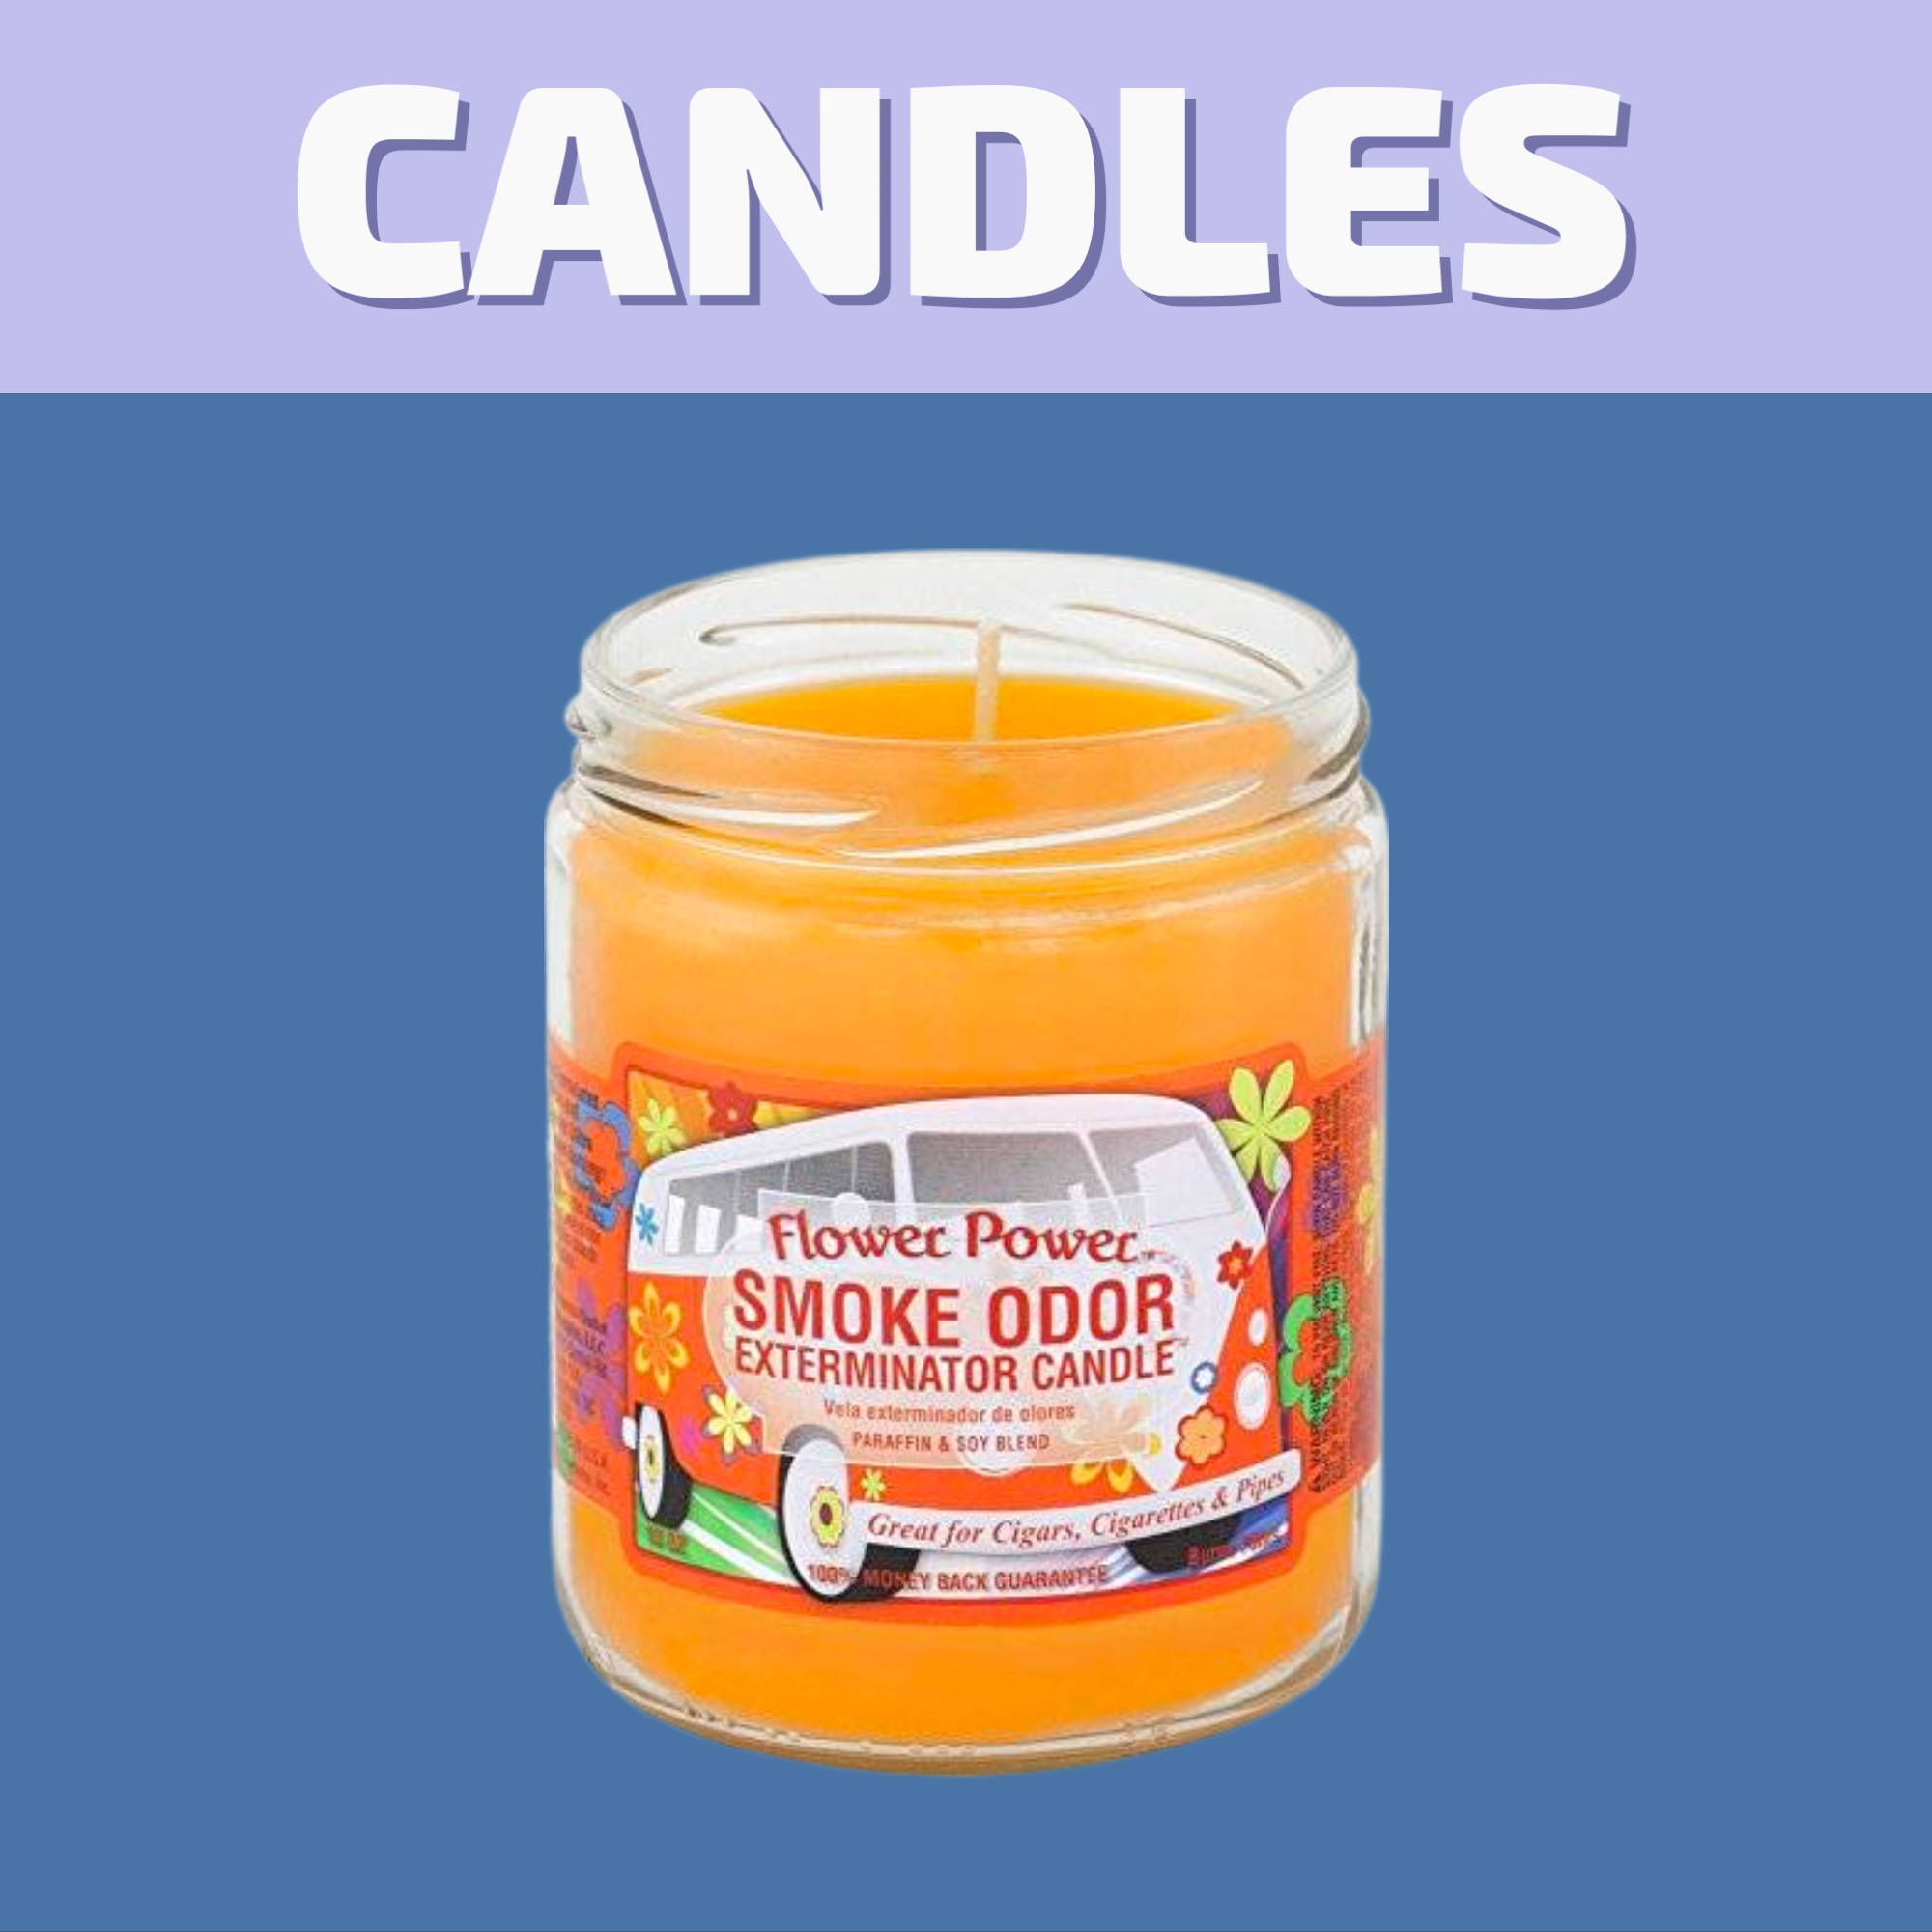 Shop our selection of Candles for same day delivery in Winnipeg or pick up at Winnipeg's best dispensary.